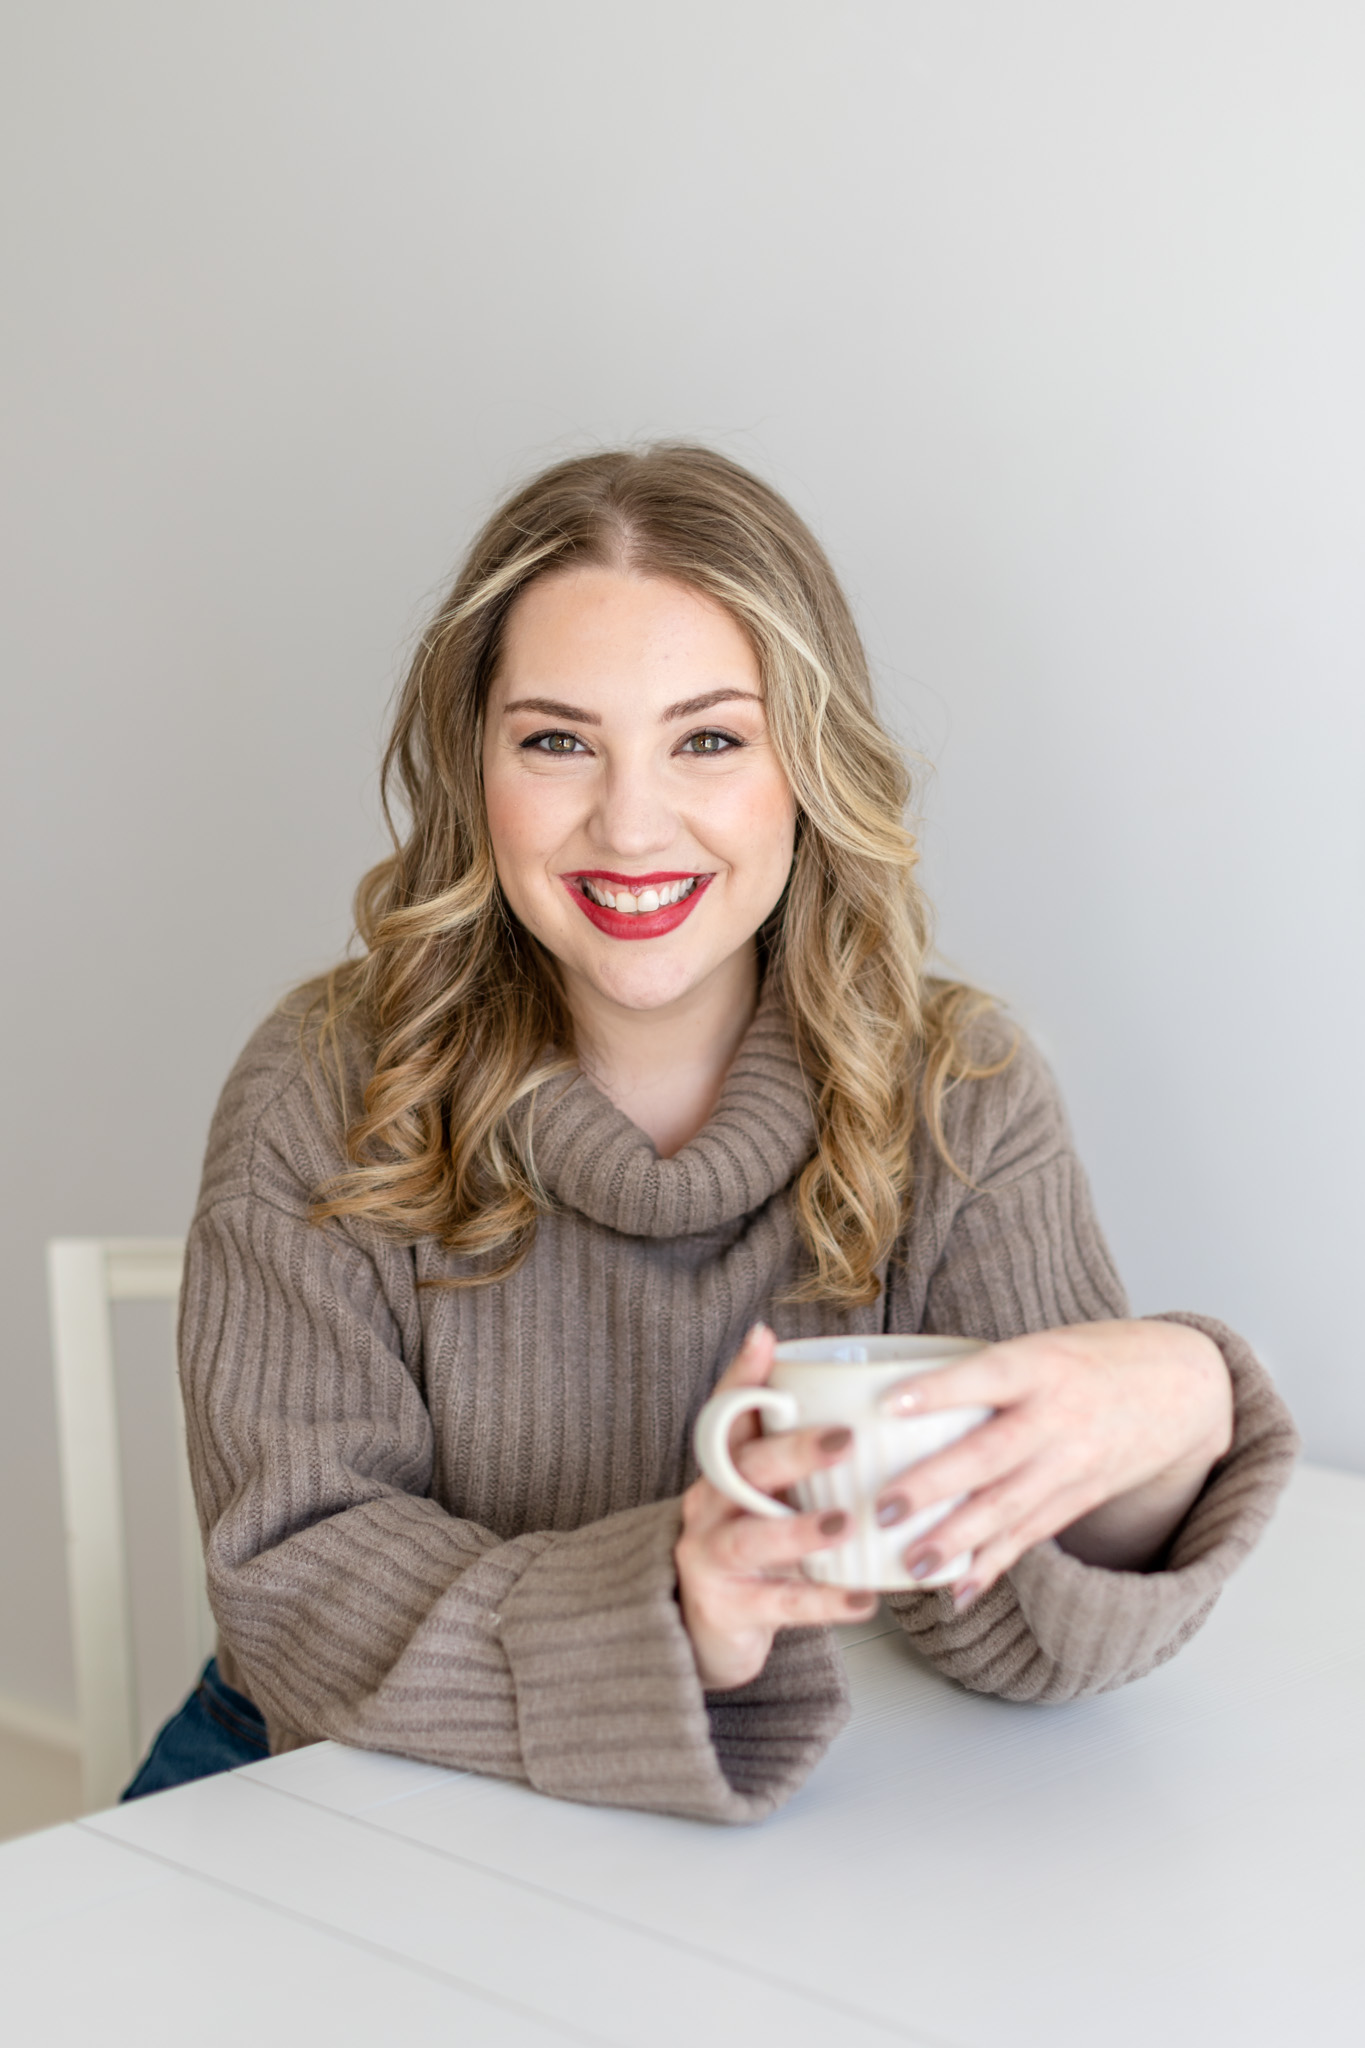 a photo of copywriter Megan Taylor holding a cup of coffee and looking into the camera smiling